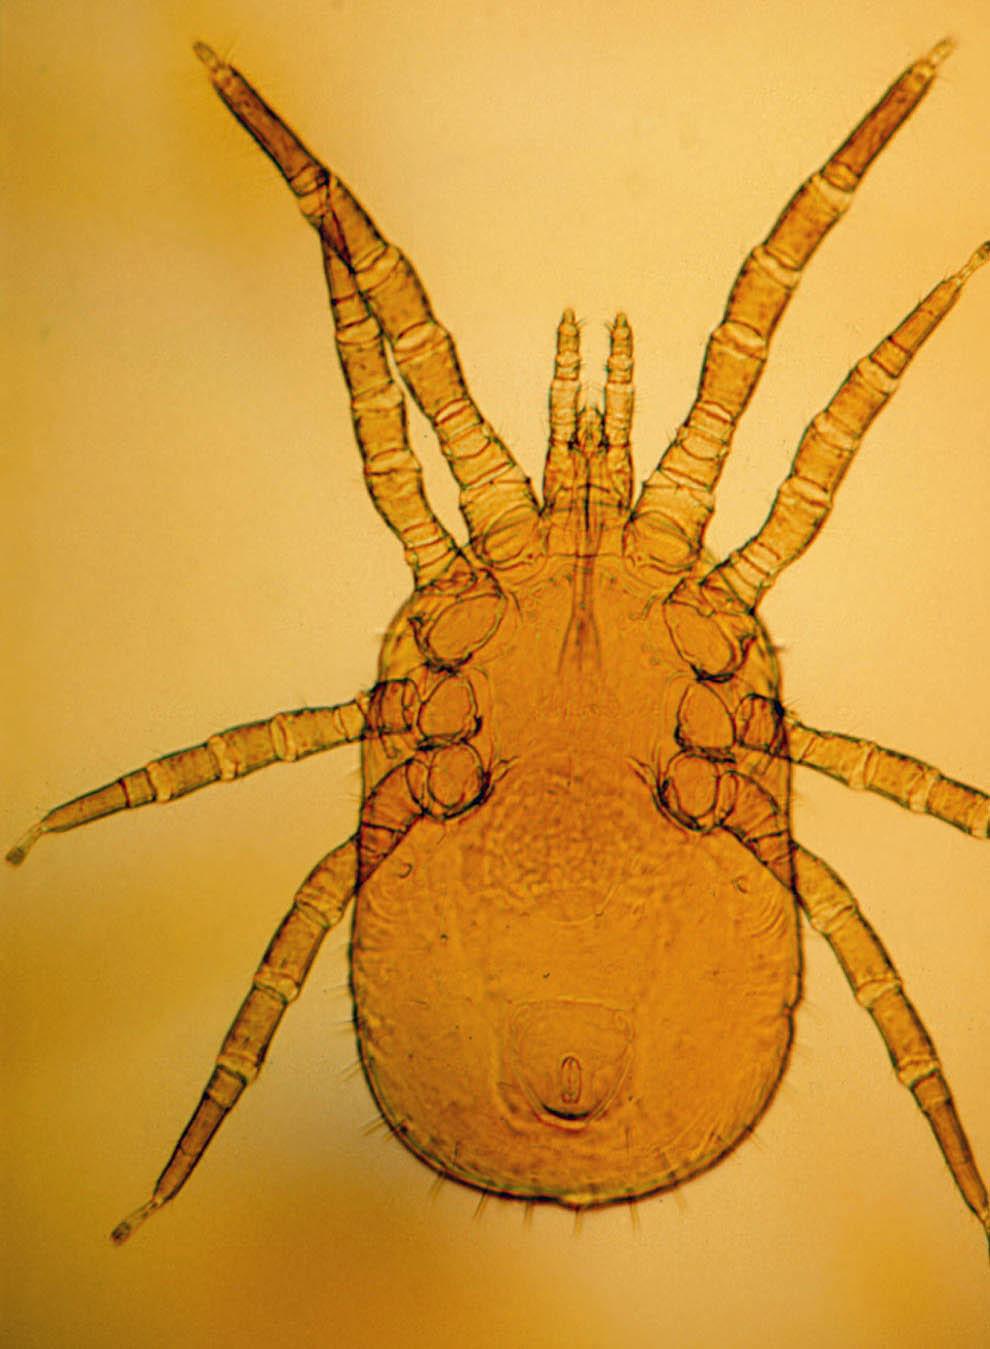 The mites also will bite people, causing itching and irritation to the skin. The adult female mite lays eggs on the host bird.